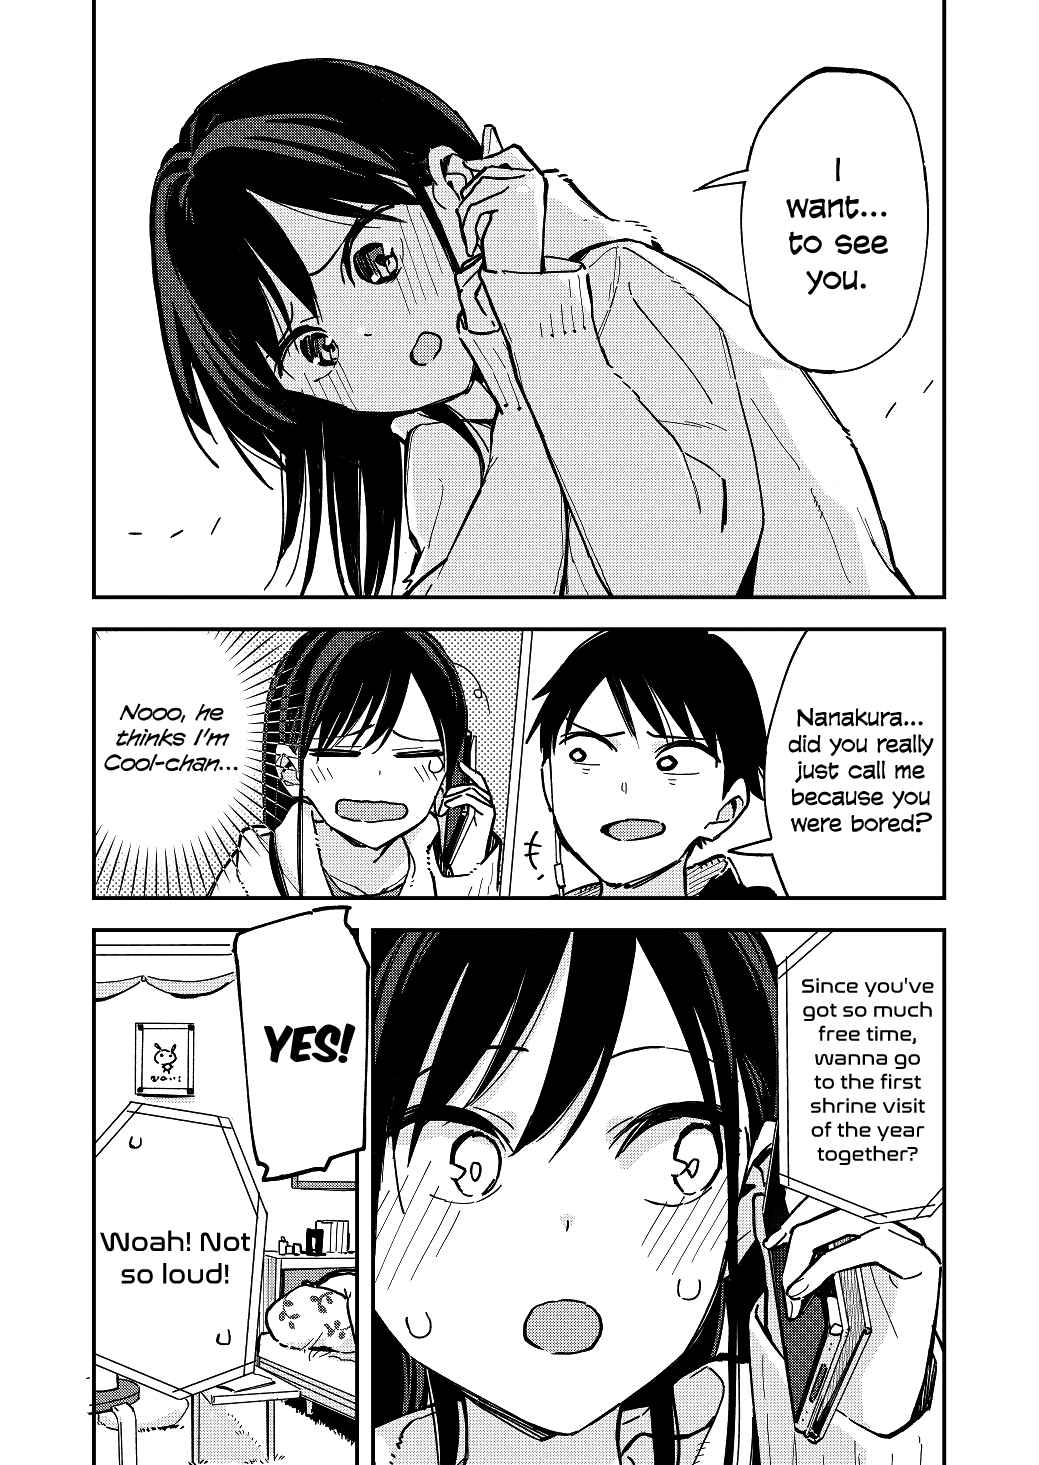 Pseudo Harem Ch. 24 End of the Year